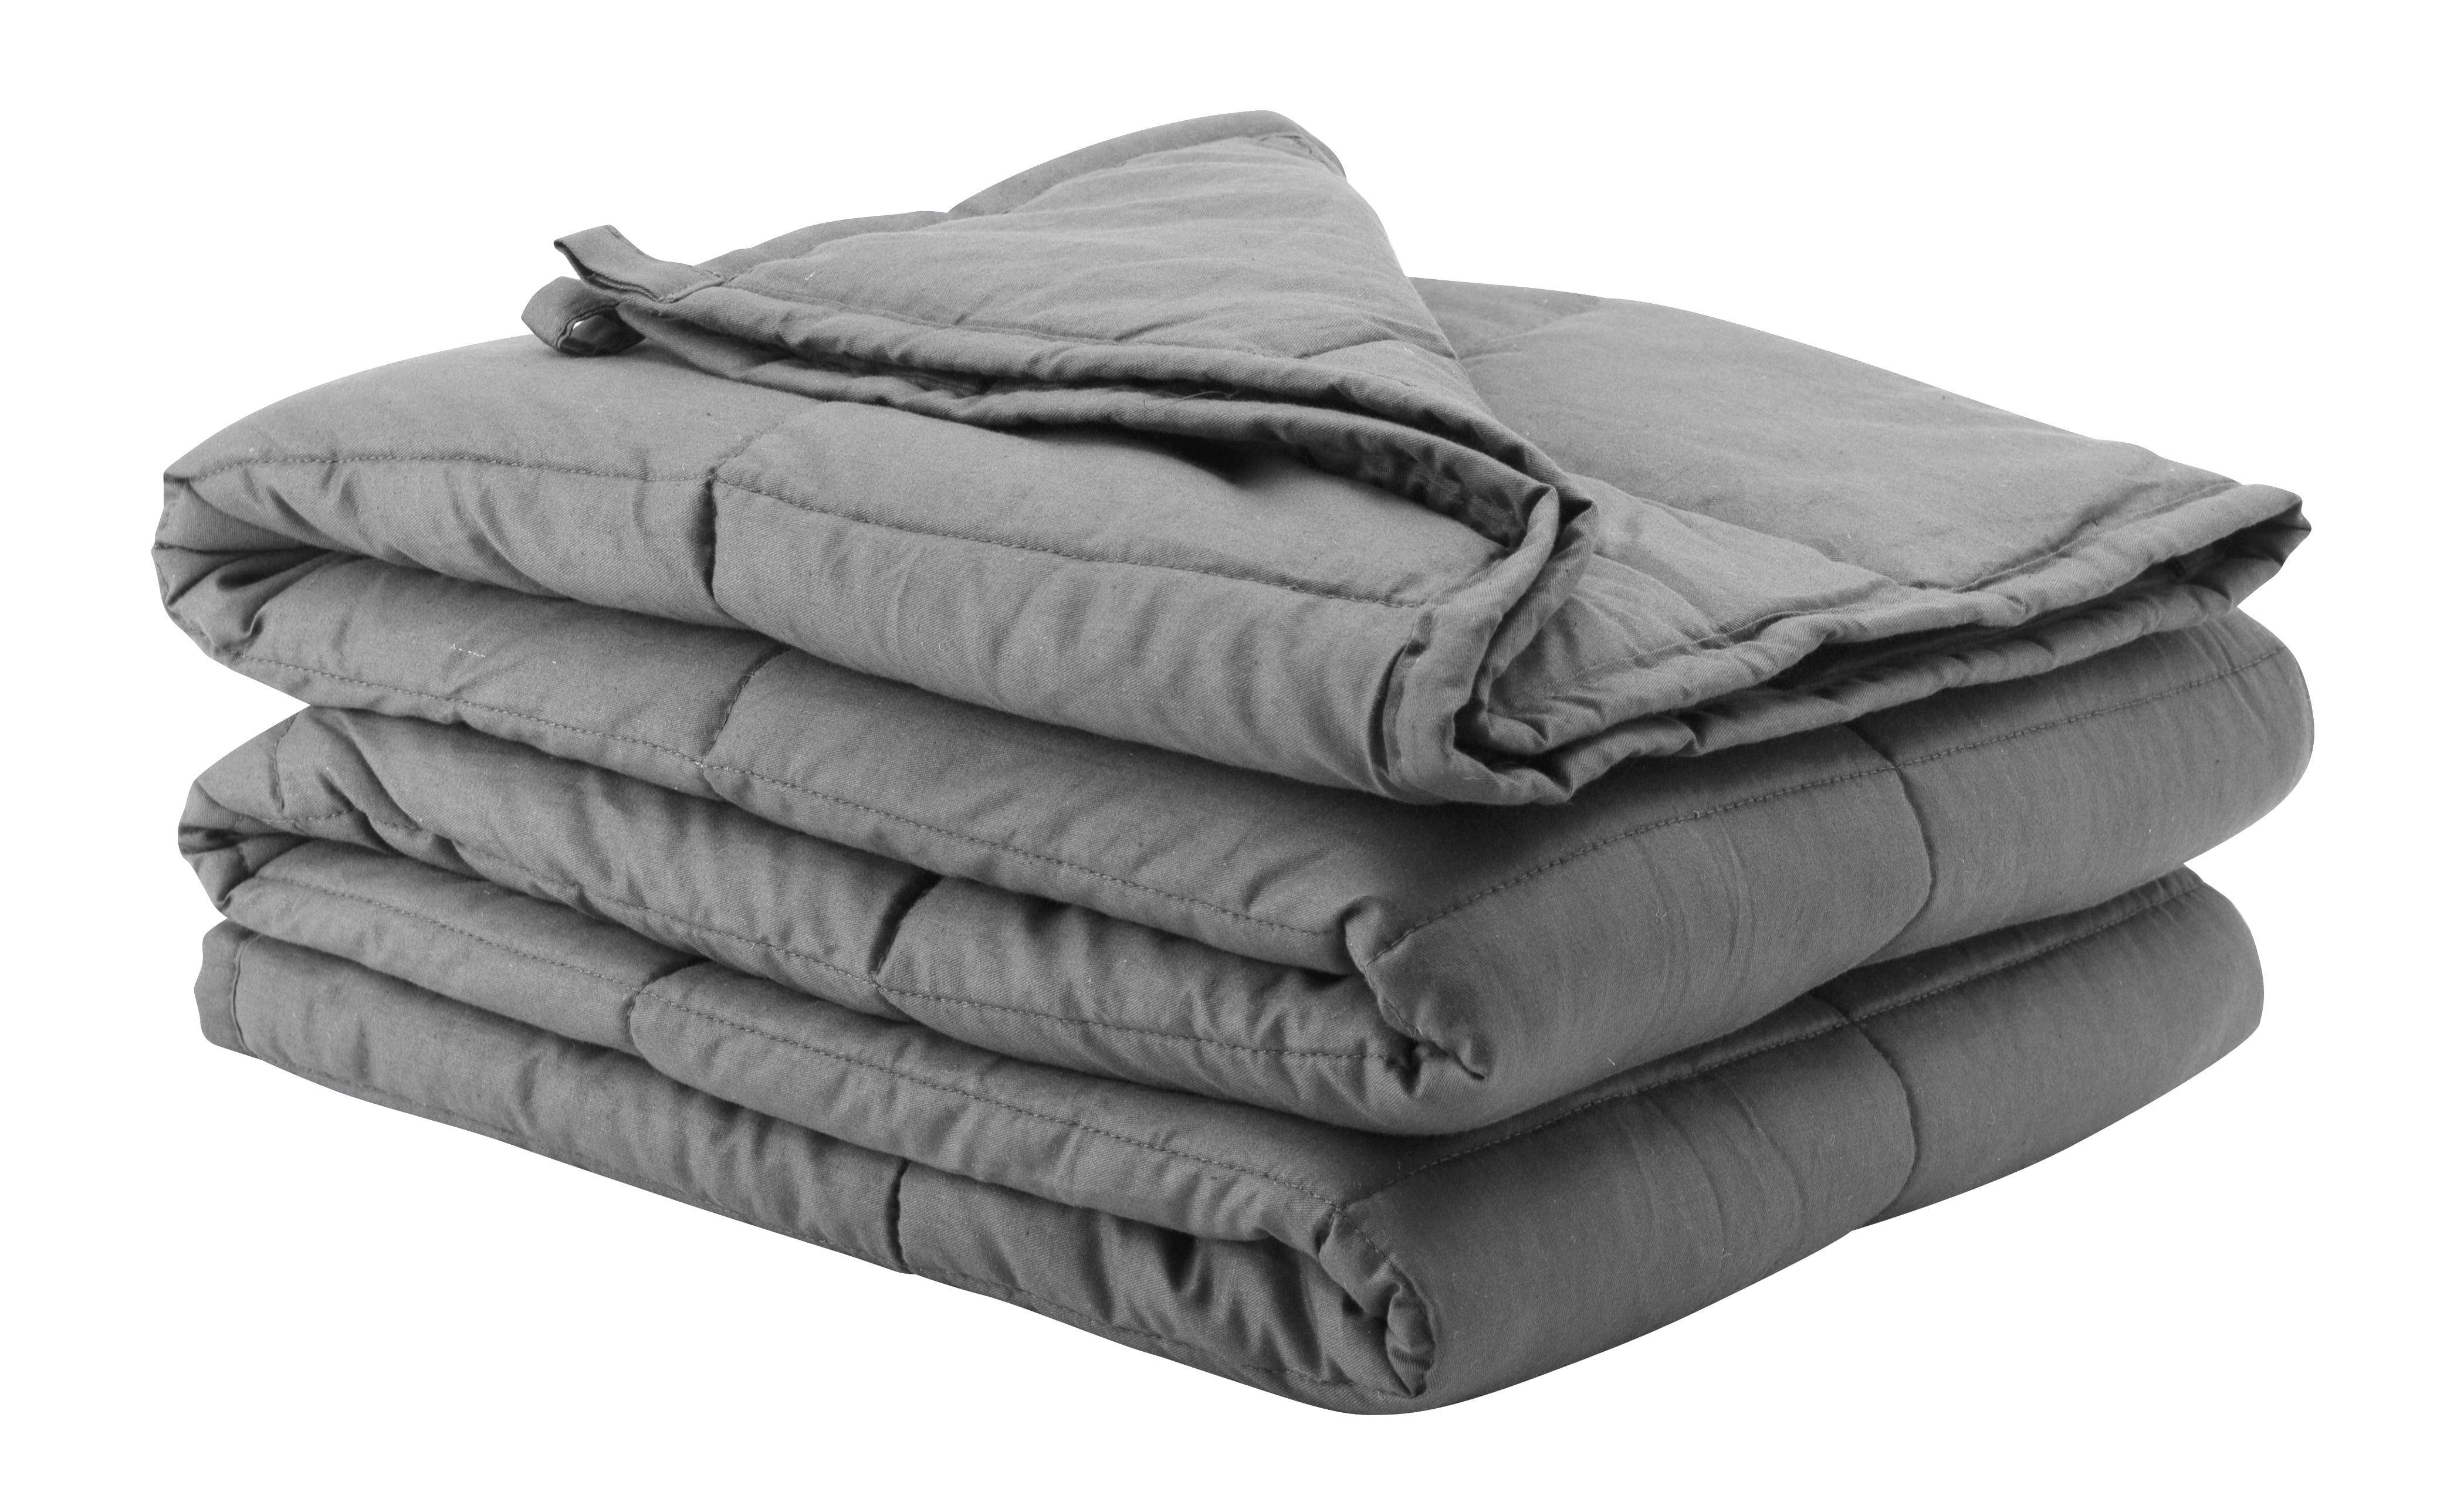 Details about   20 lbs 48'' x 72'' Weighted Blanket Twin Size Reduce Stress Anxiety For All Ages